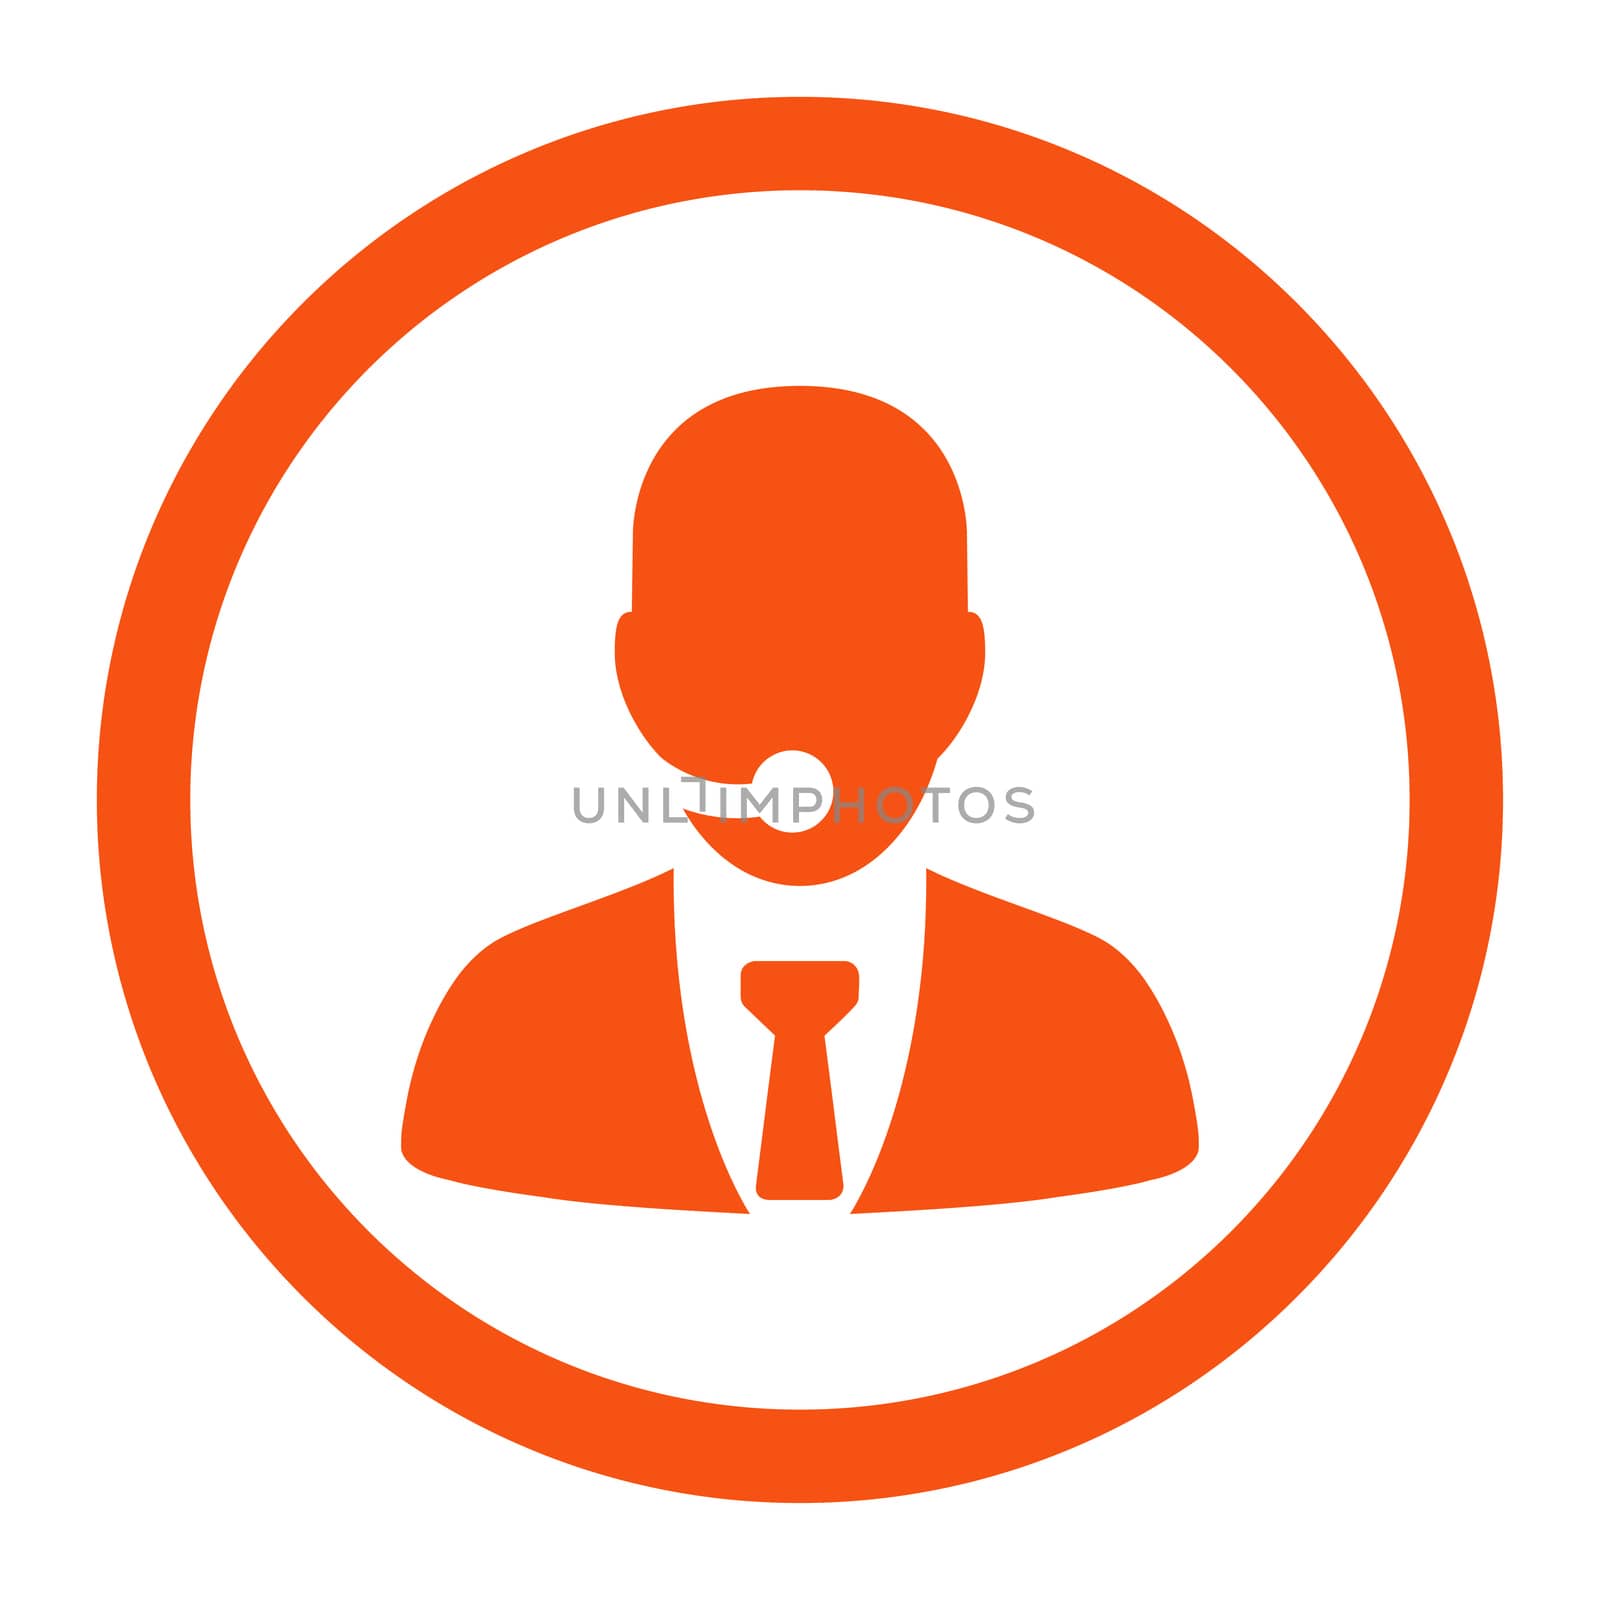 Call center operator glyph icon. This rounded flat symbol is drawn with orange color on a white background.